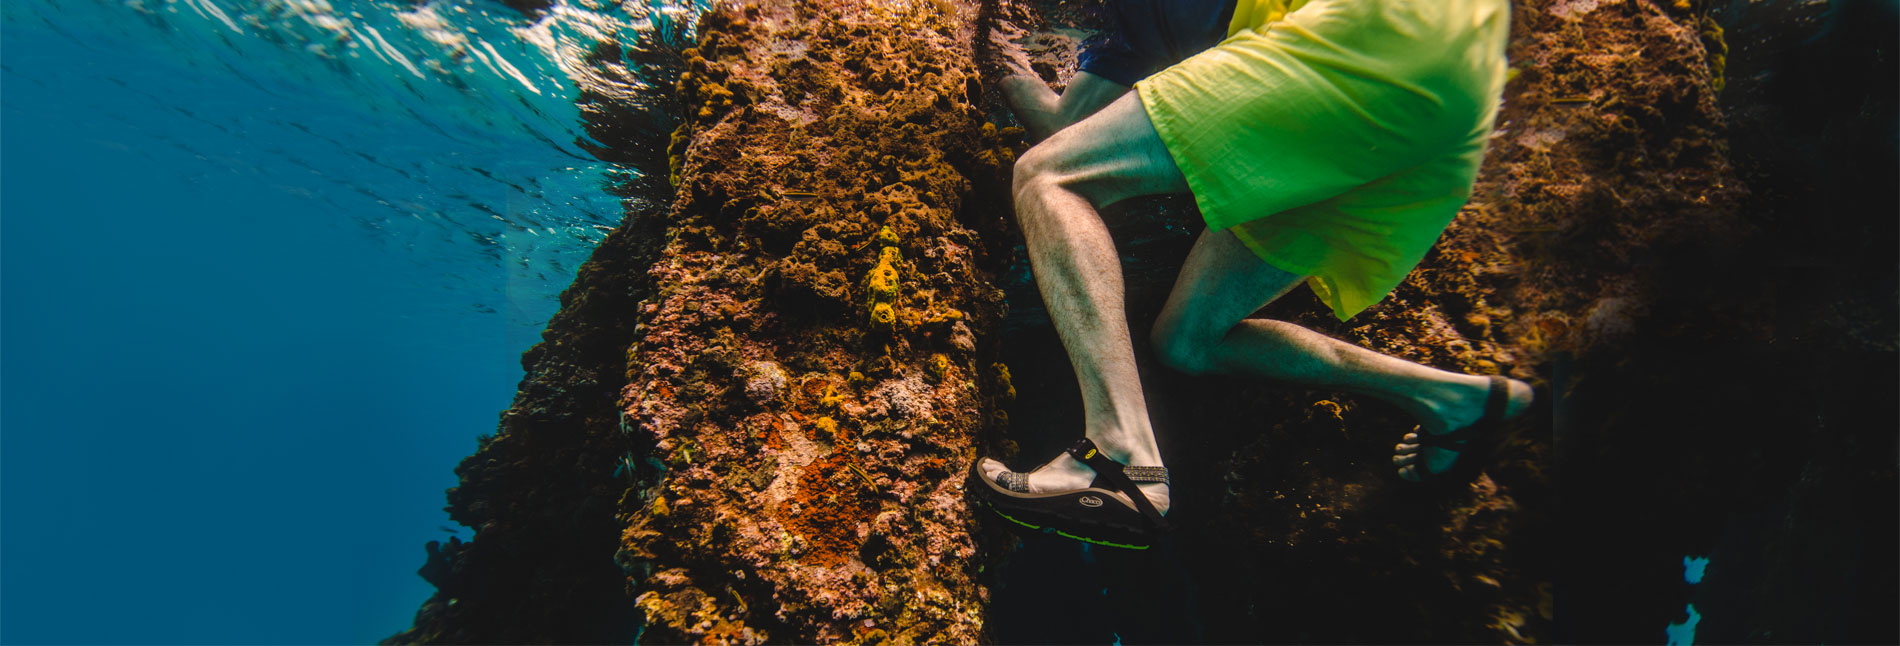 Person swimming in a coral reef wearing Chaco sandals.